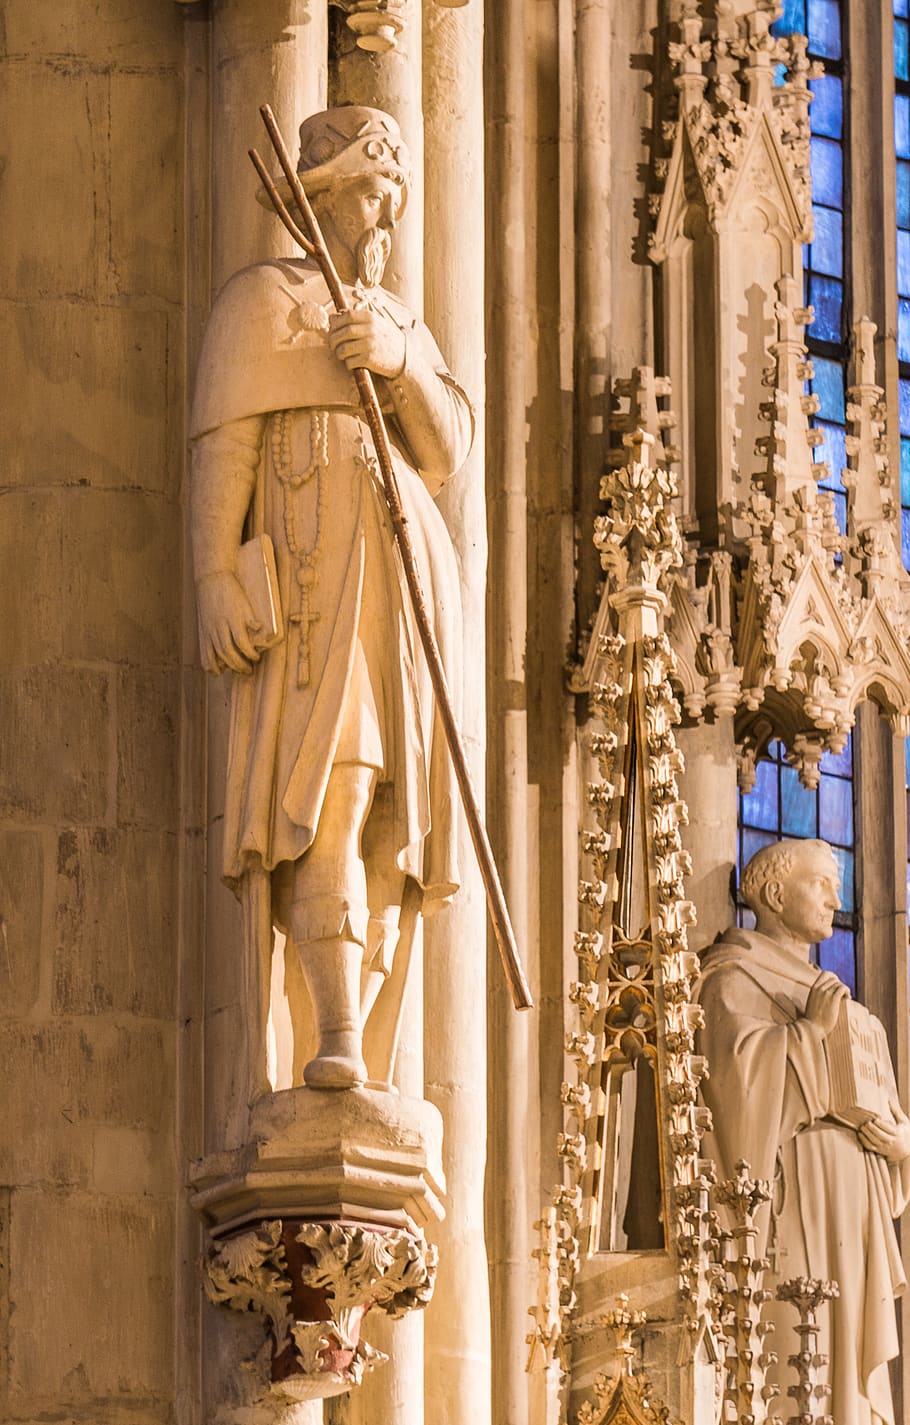 travel, architecture, church, sculpture, cathedral, münster, lamberti, james, sand stone, figure